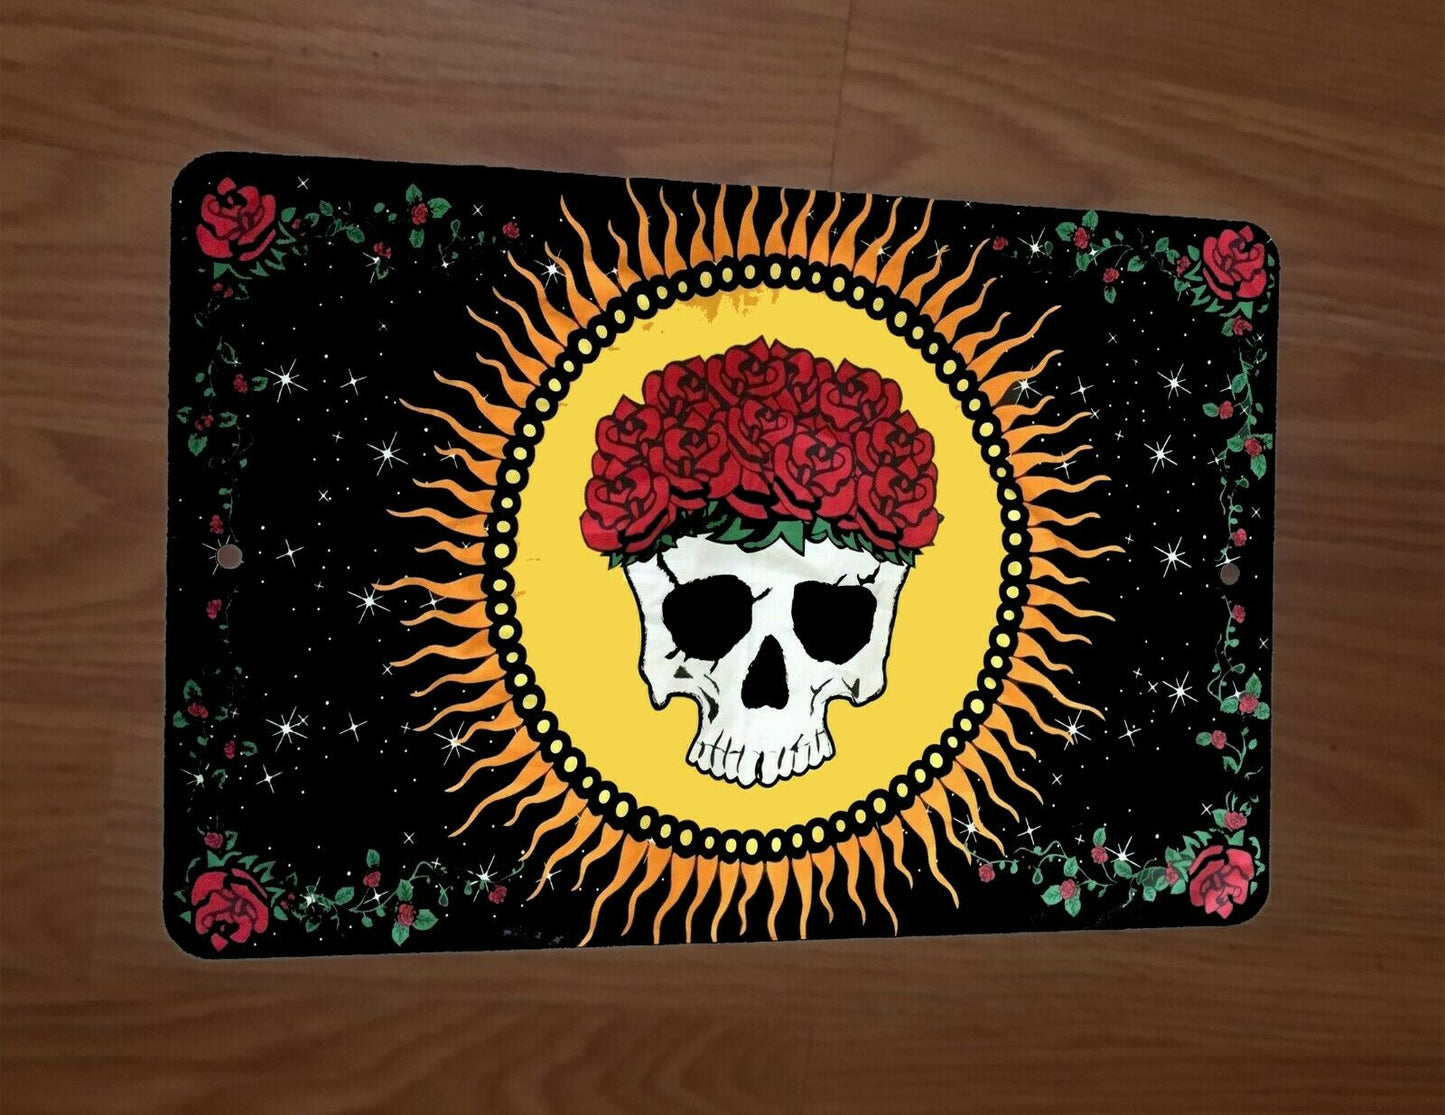 Skull and Roses Sun Space Face Grateful Dead Music Poster 8x12 Metal Wall Sign